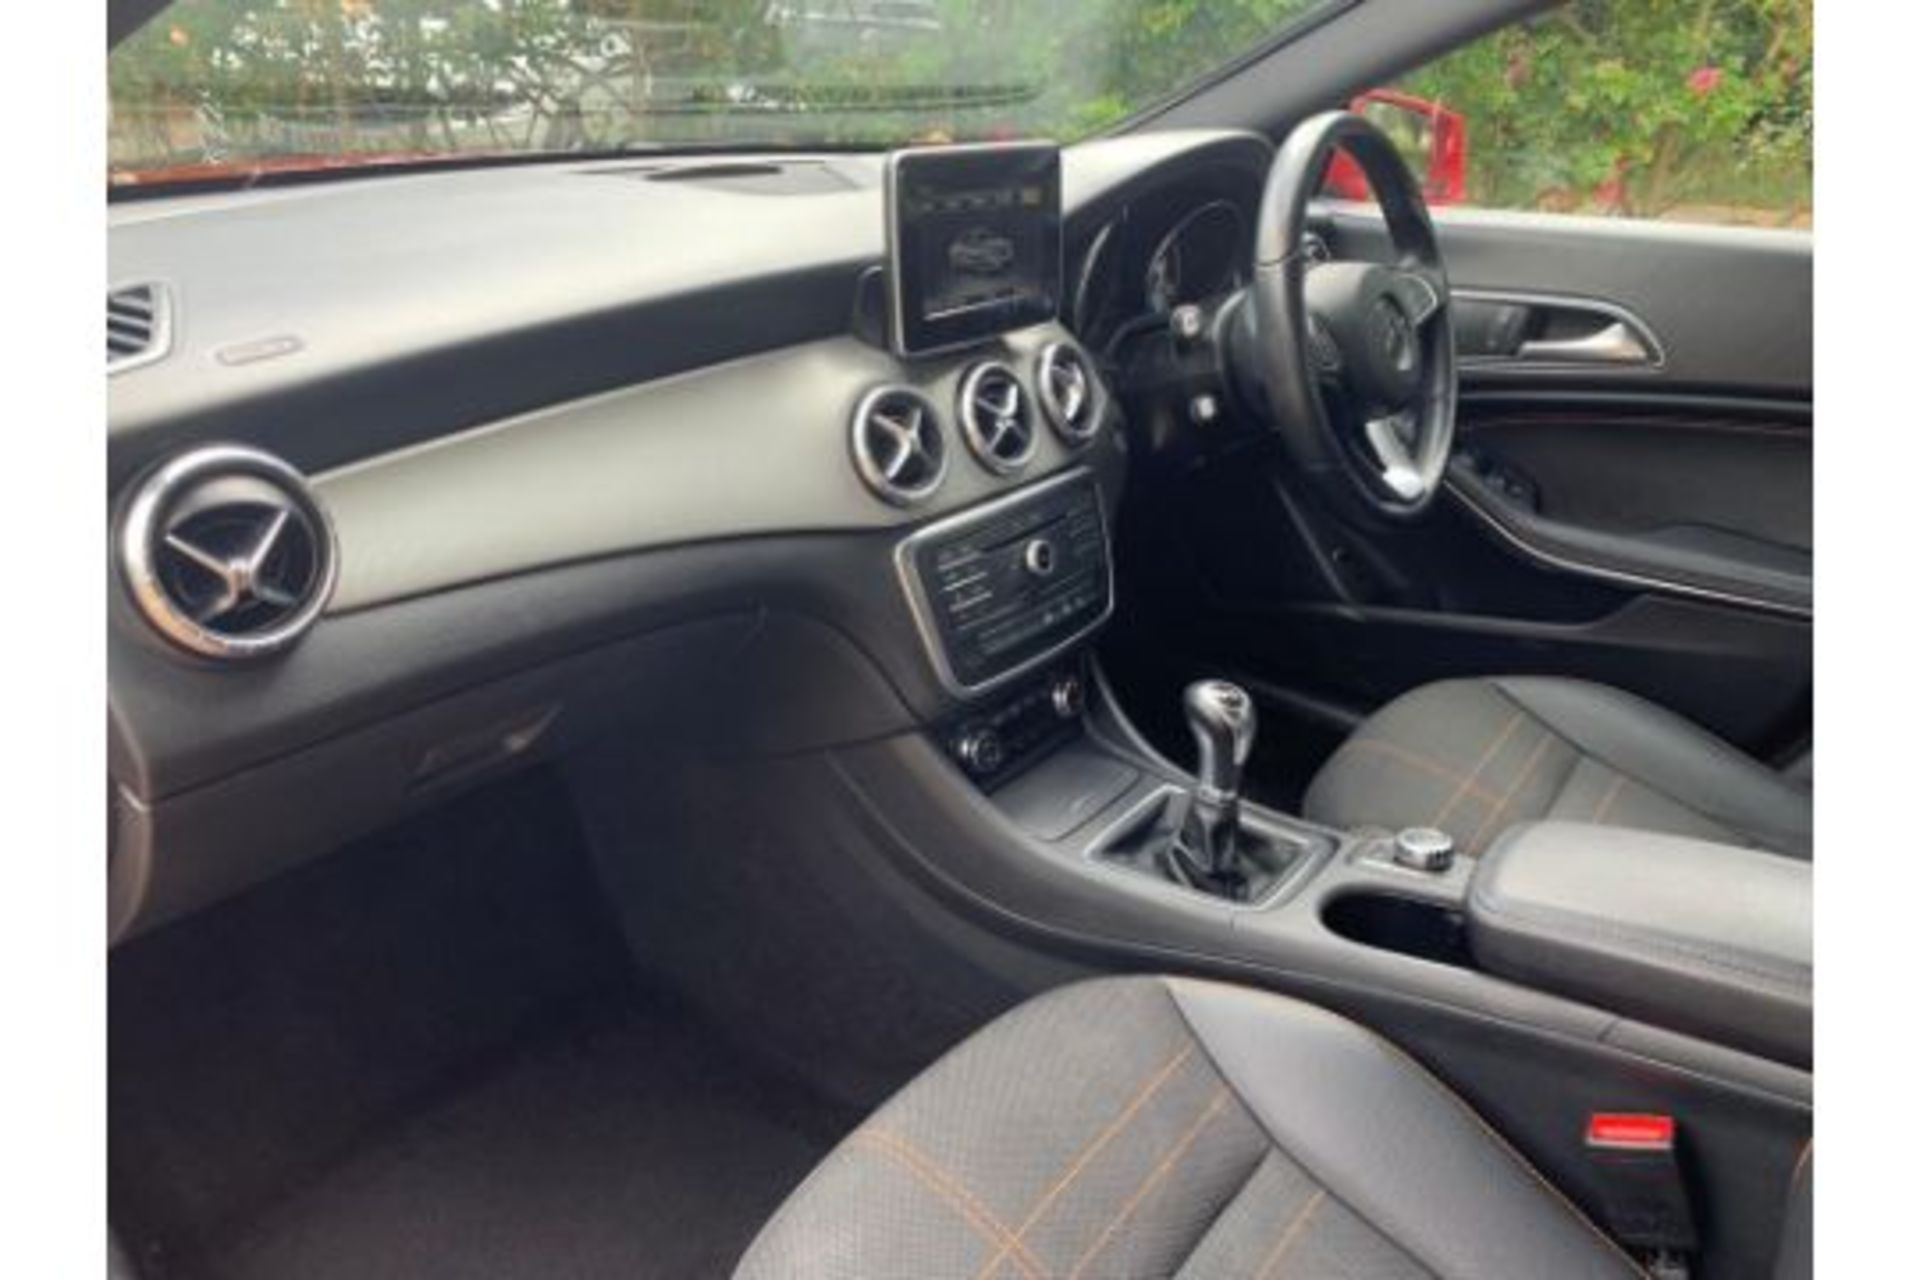 Mercedes Benz CLA 200 CDI "Sport" Edition - 2016 Model - 1 Owner From New - Leather - HUGE SPEC!! - Image 11 of 25